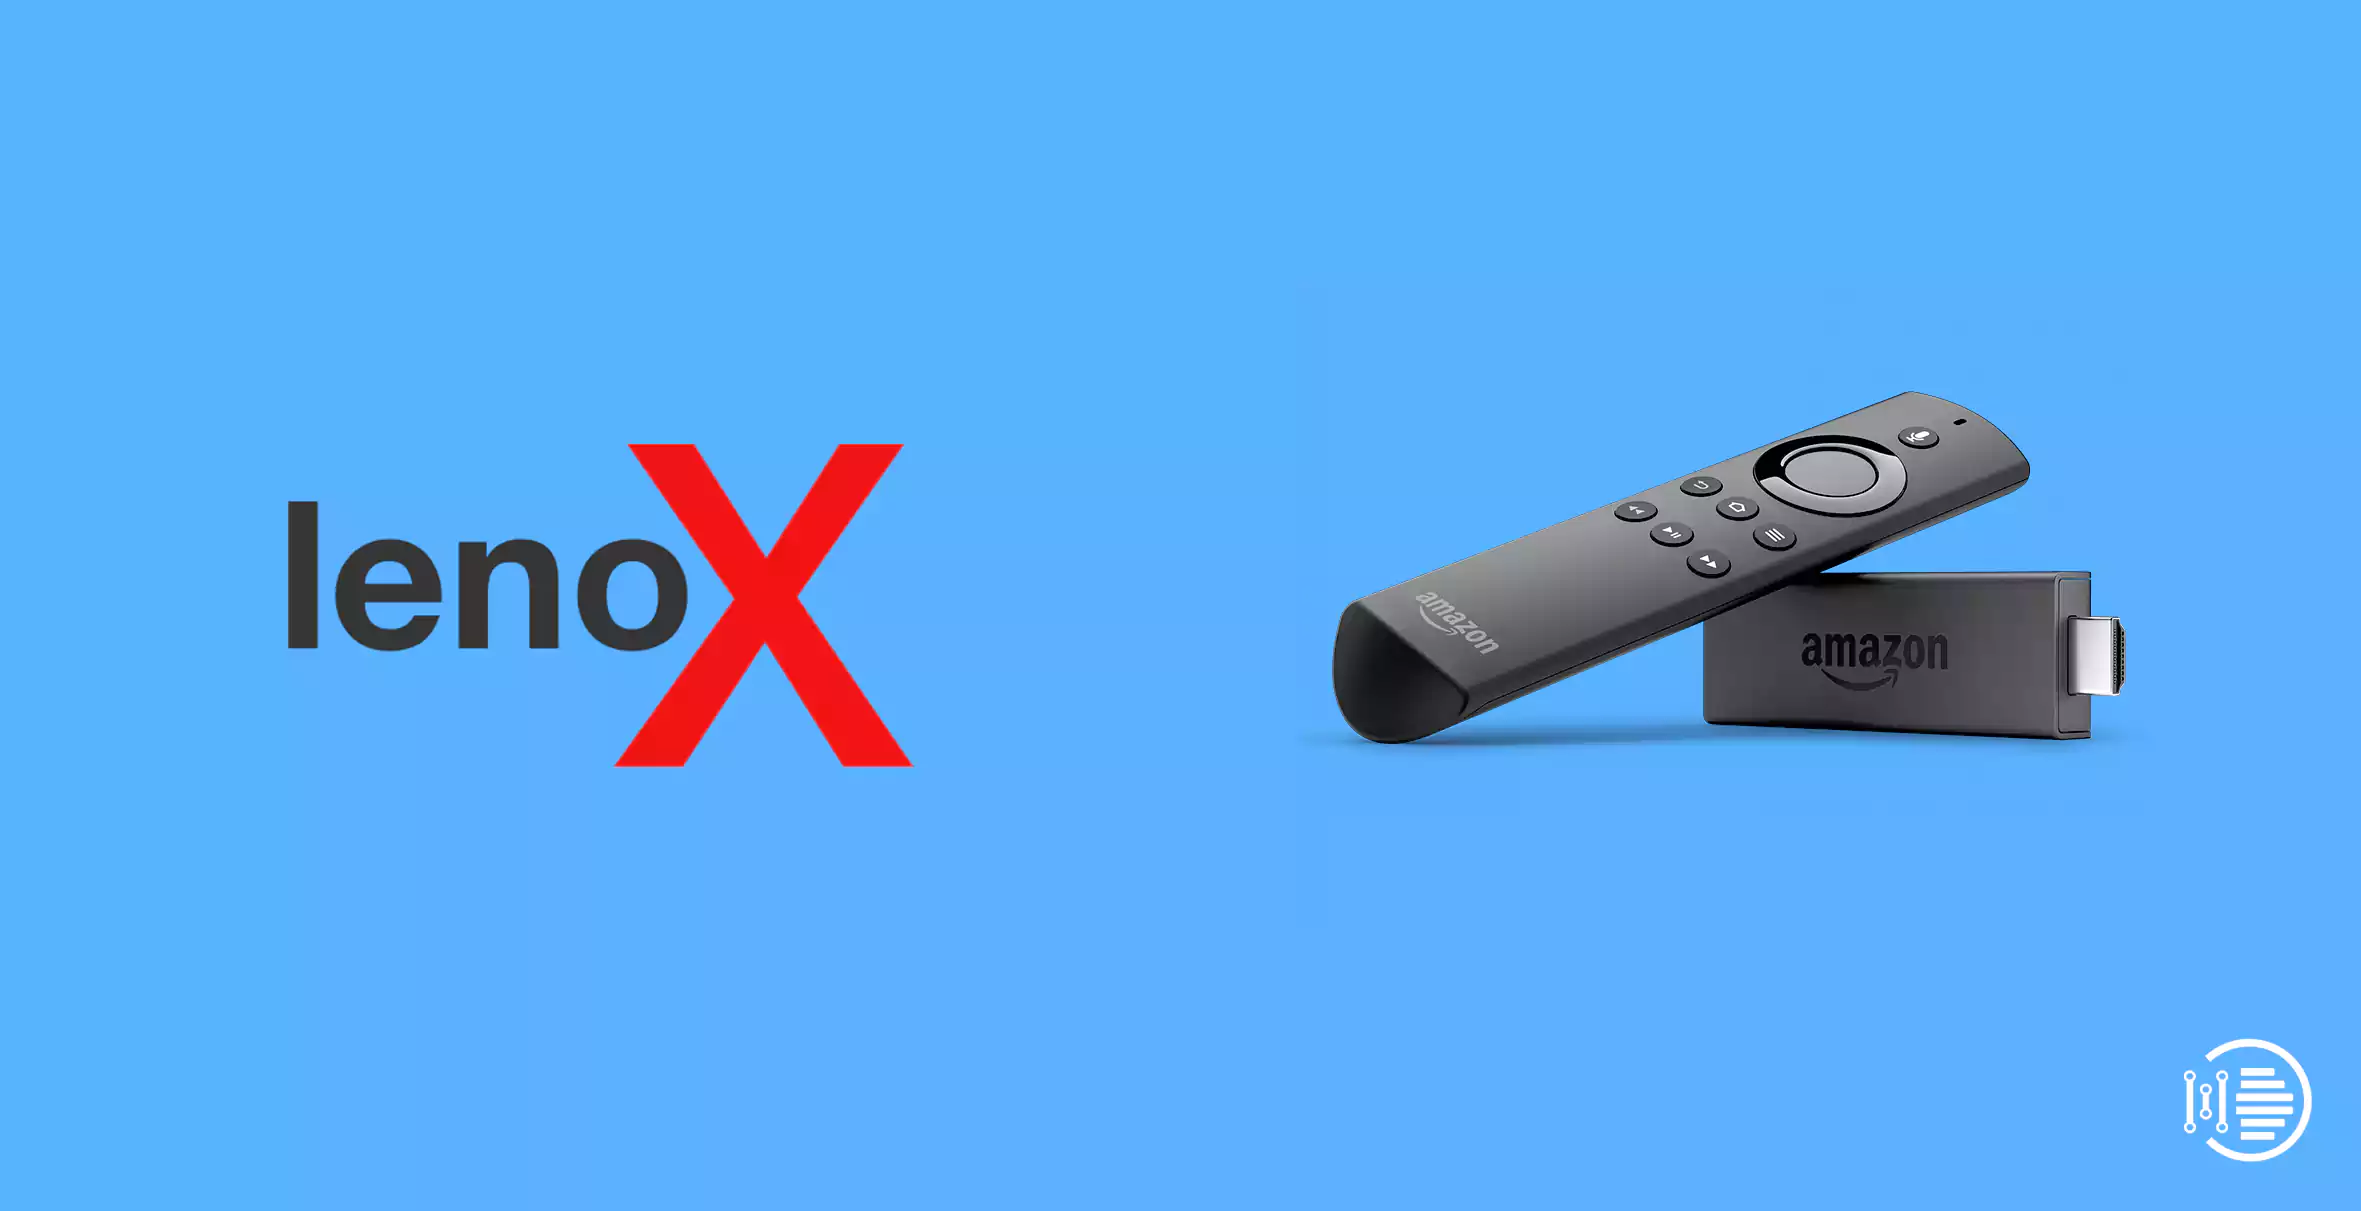 How to Download and Install Lenox Media Player on Firestick